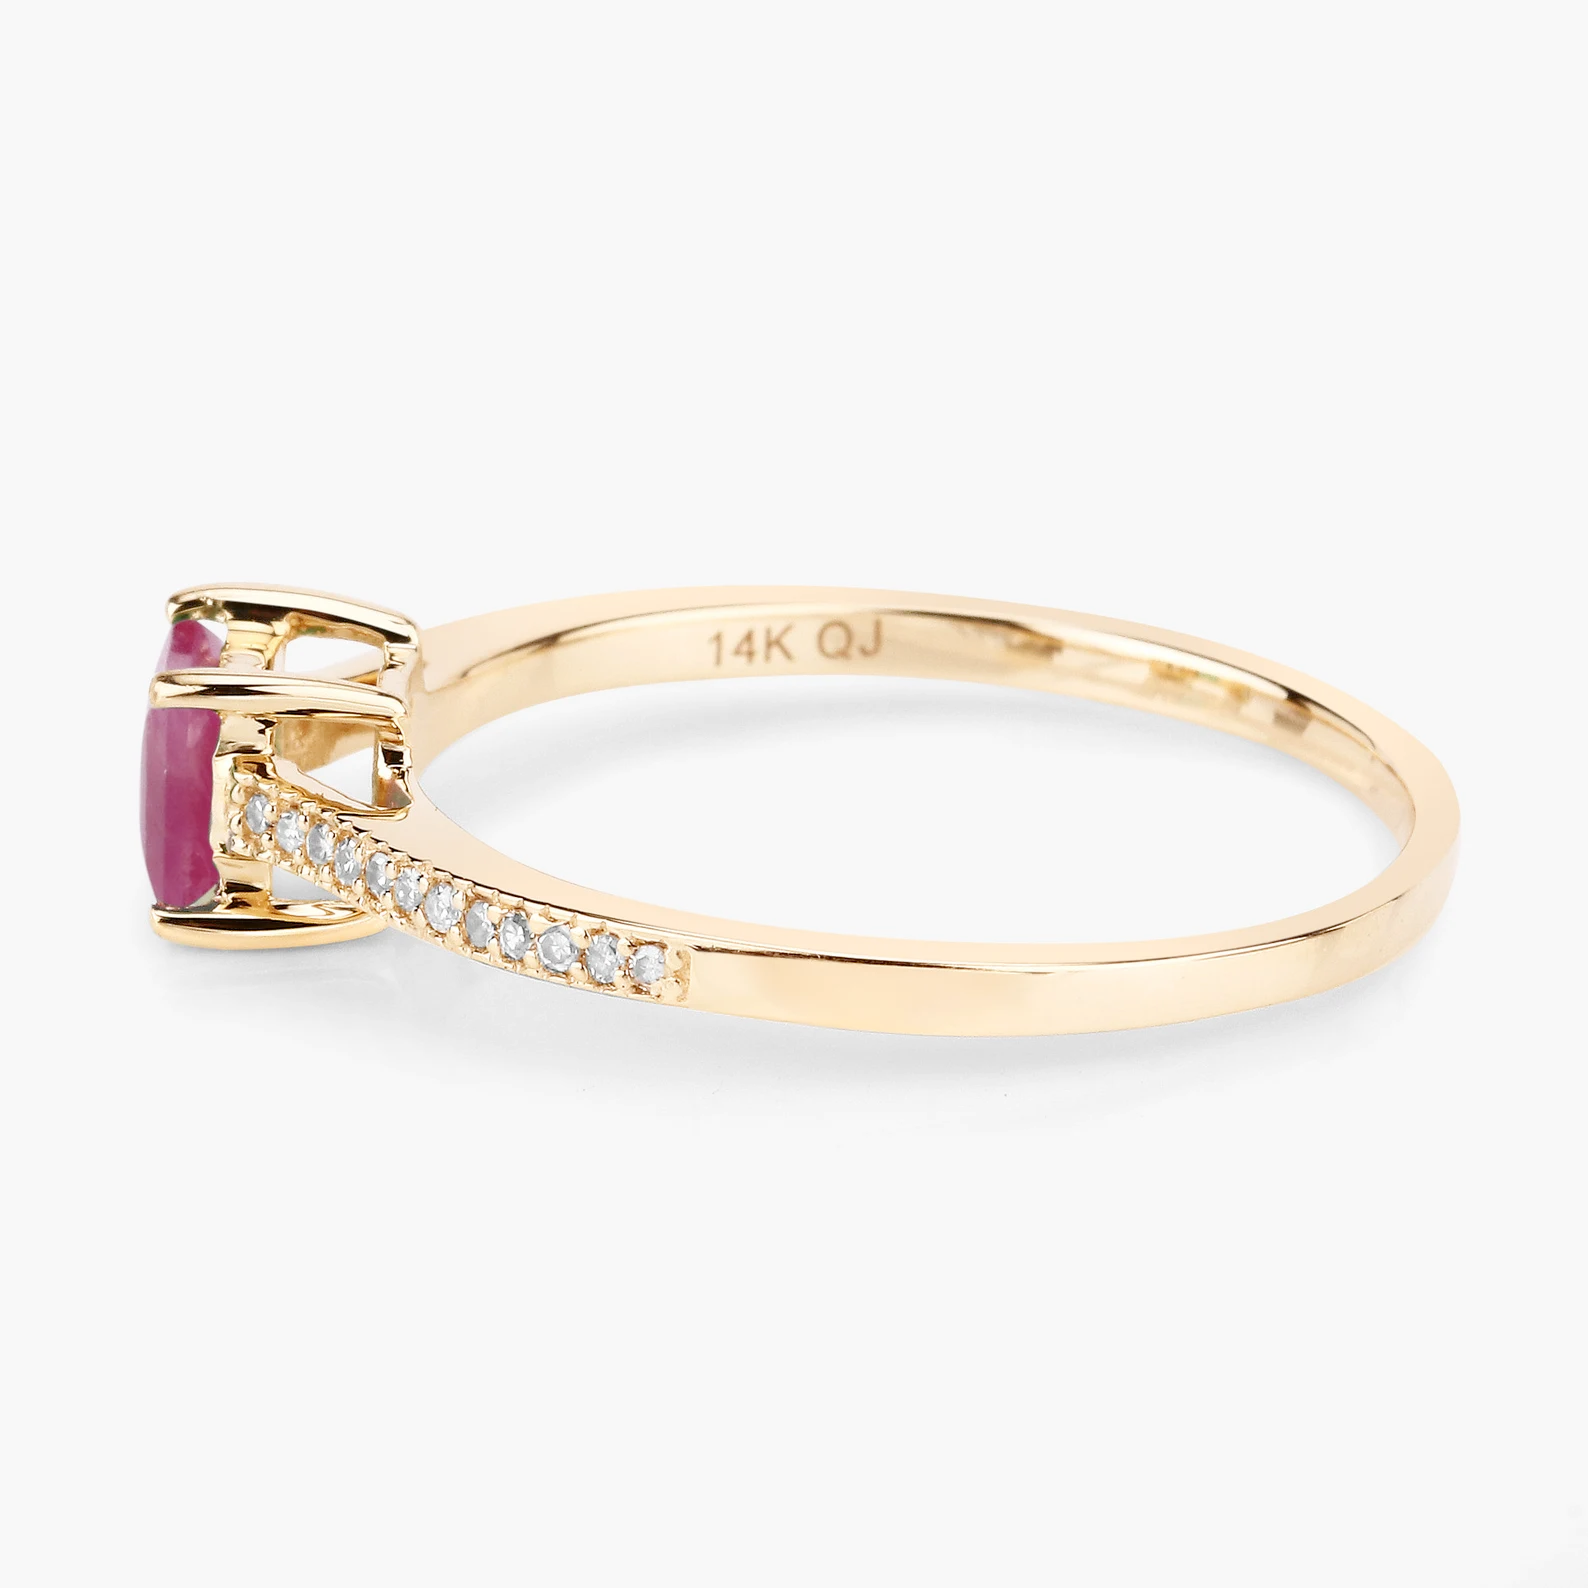 Square Ruby and 24 White Diamonds Engagement Ring in 14K Yellow Gold 